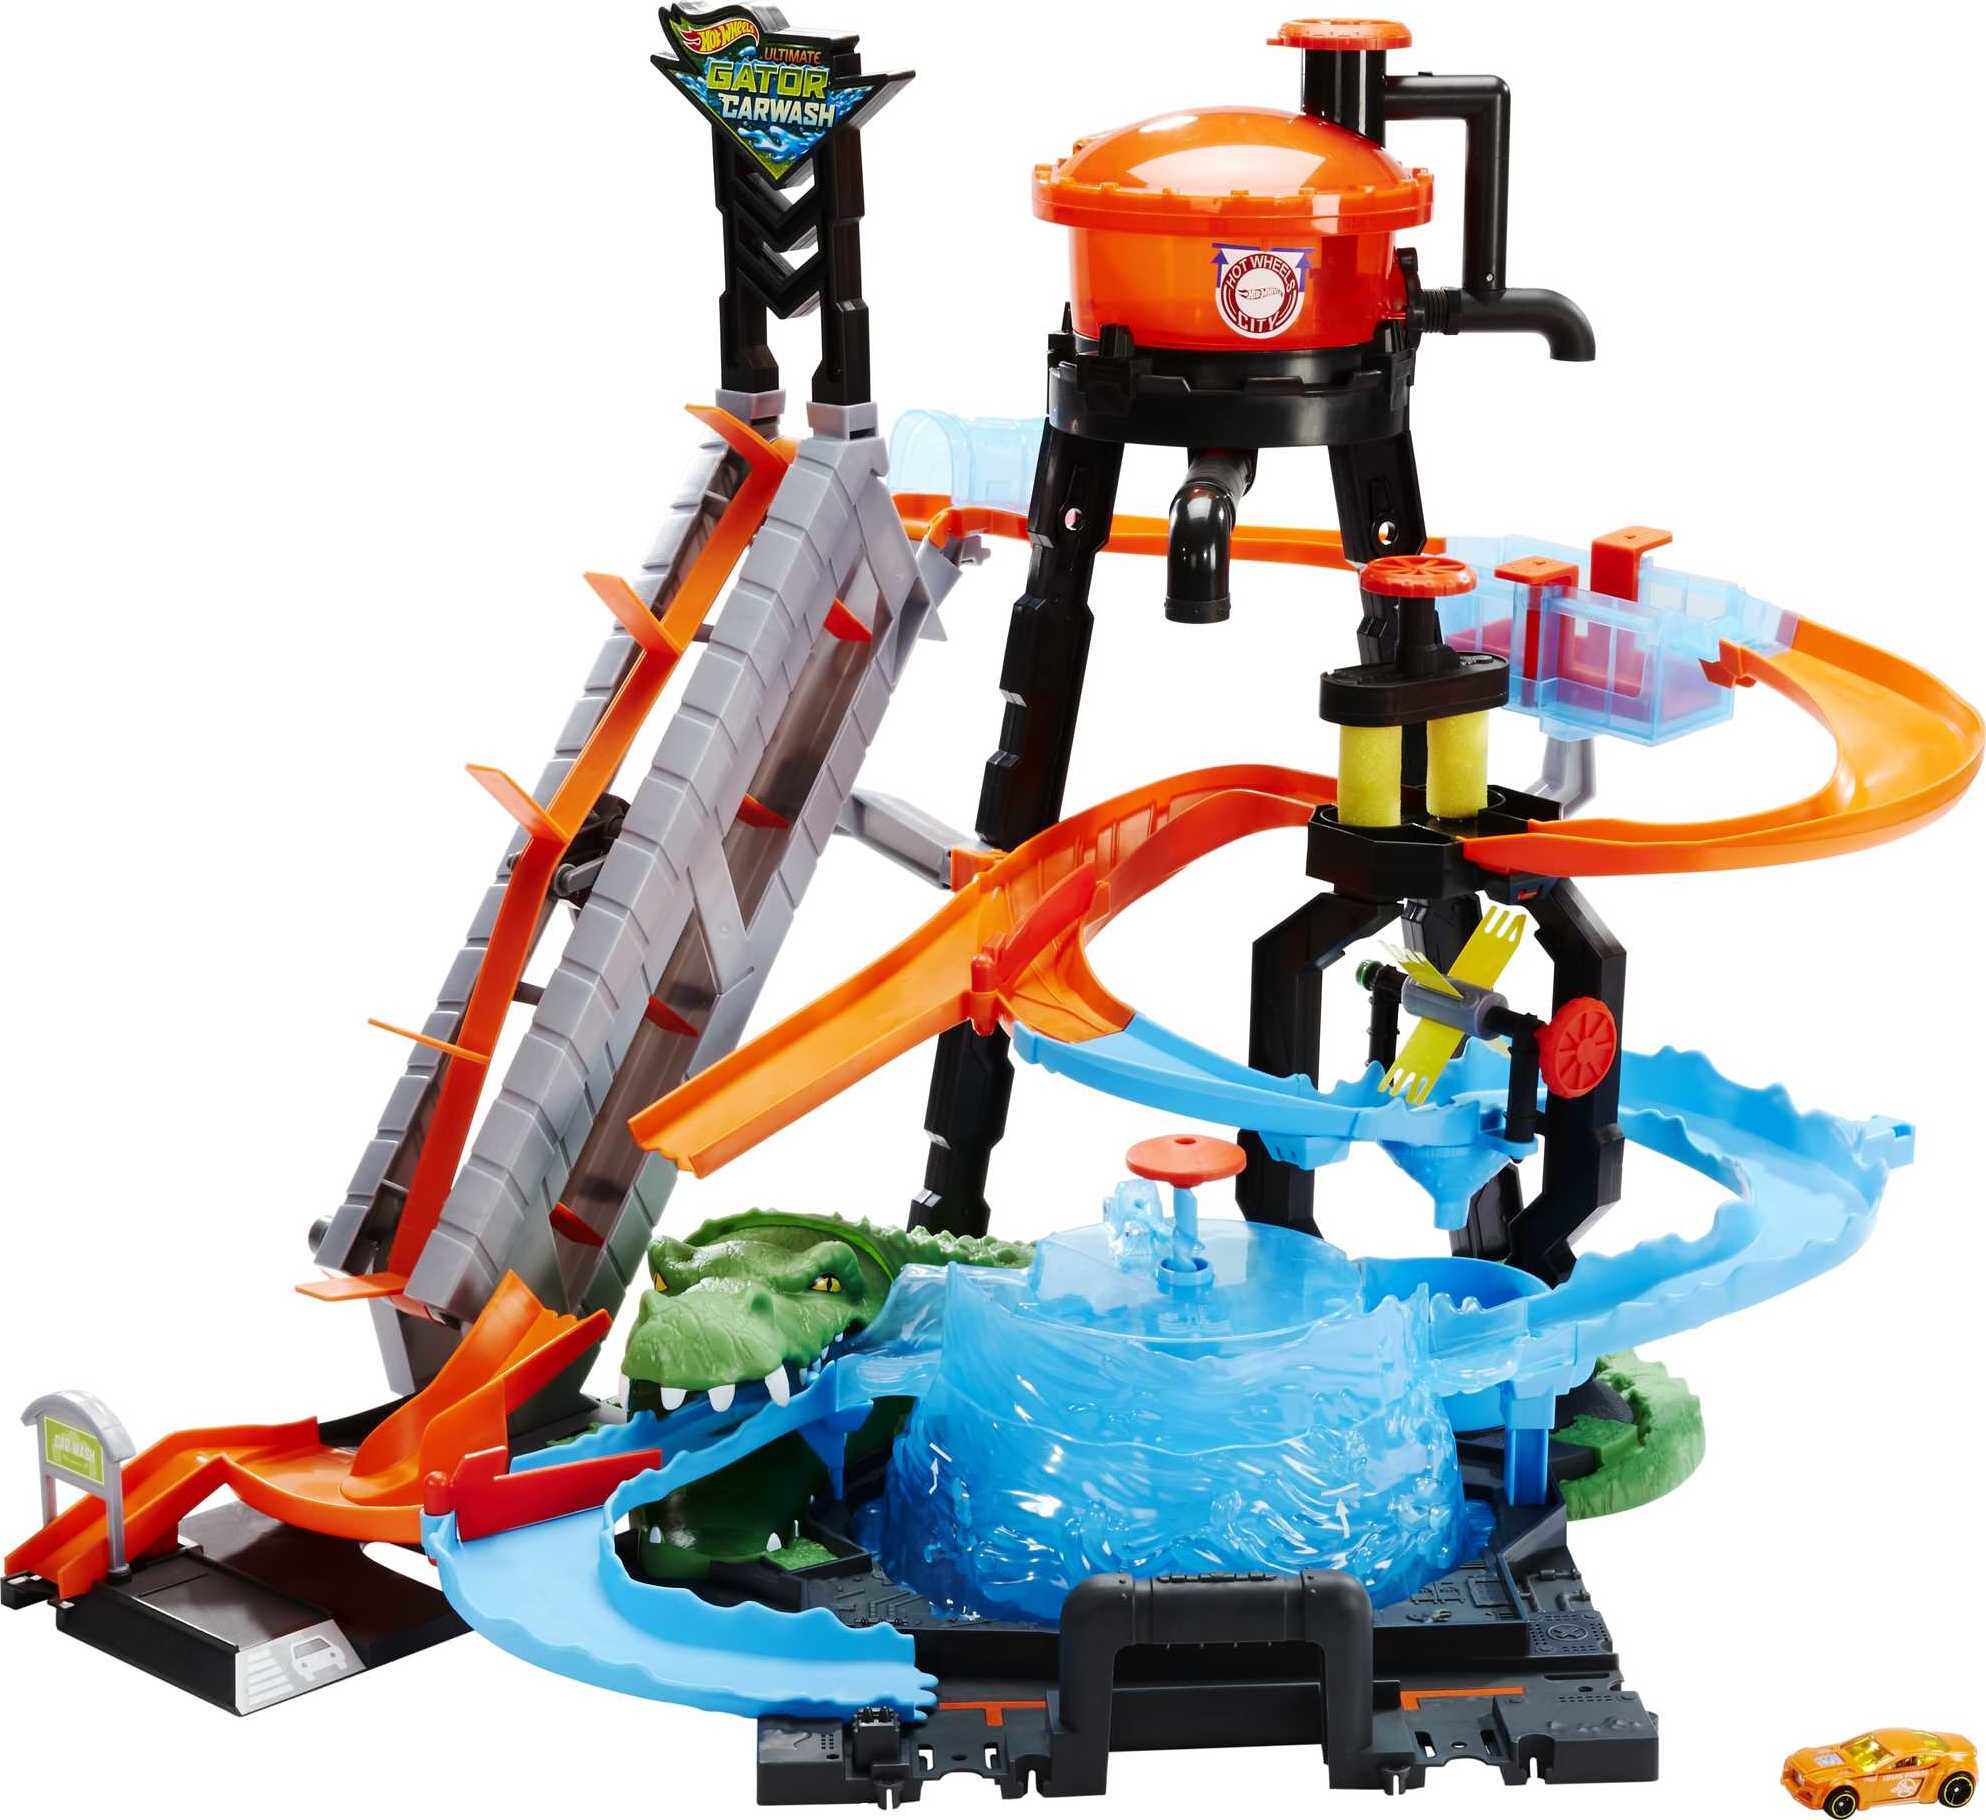 Hot Wheels Ultimate Gator Car Wash Playset with Color Shifters Toy Car in 1:64 Scale - image 1 of 7